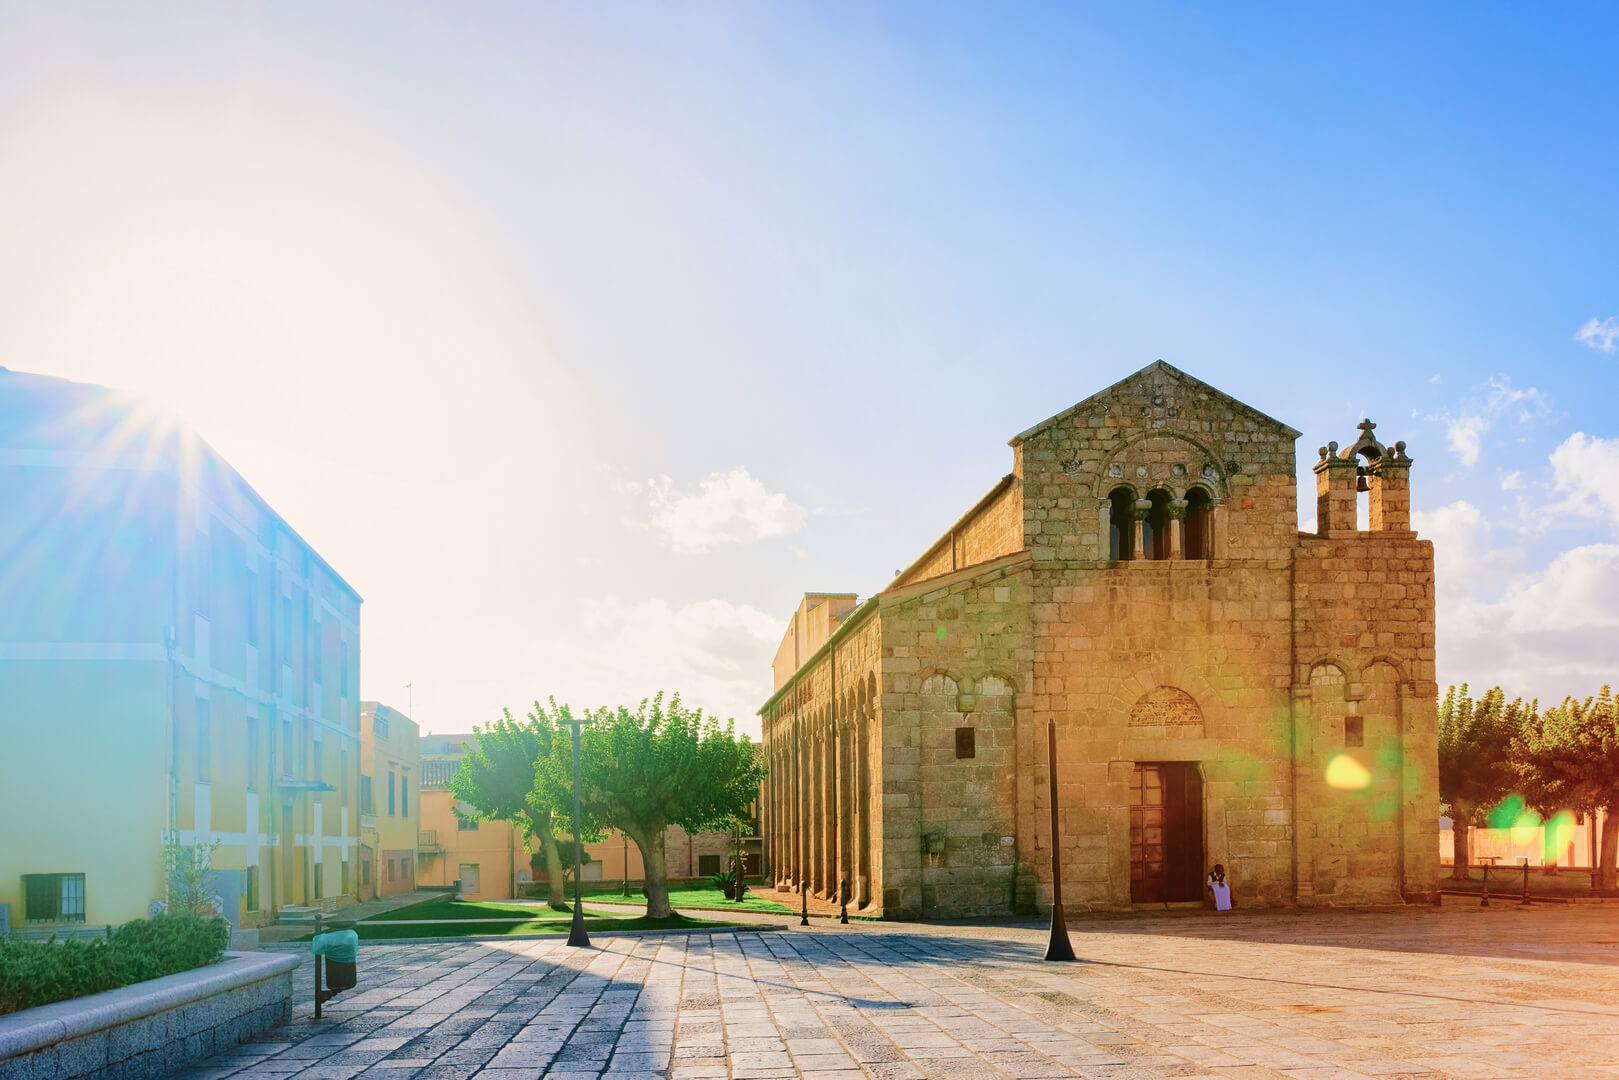 Basilica di San Simplicio Church in Old city of Olbia on Sardinia Island in Italy. Square with street lanterns and Cathedral in Sardegna island. Blue sky and sunlight